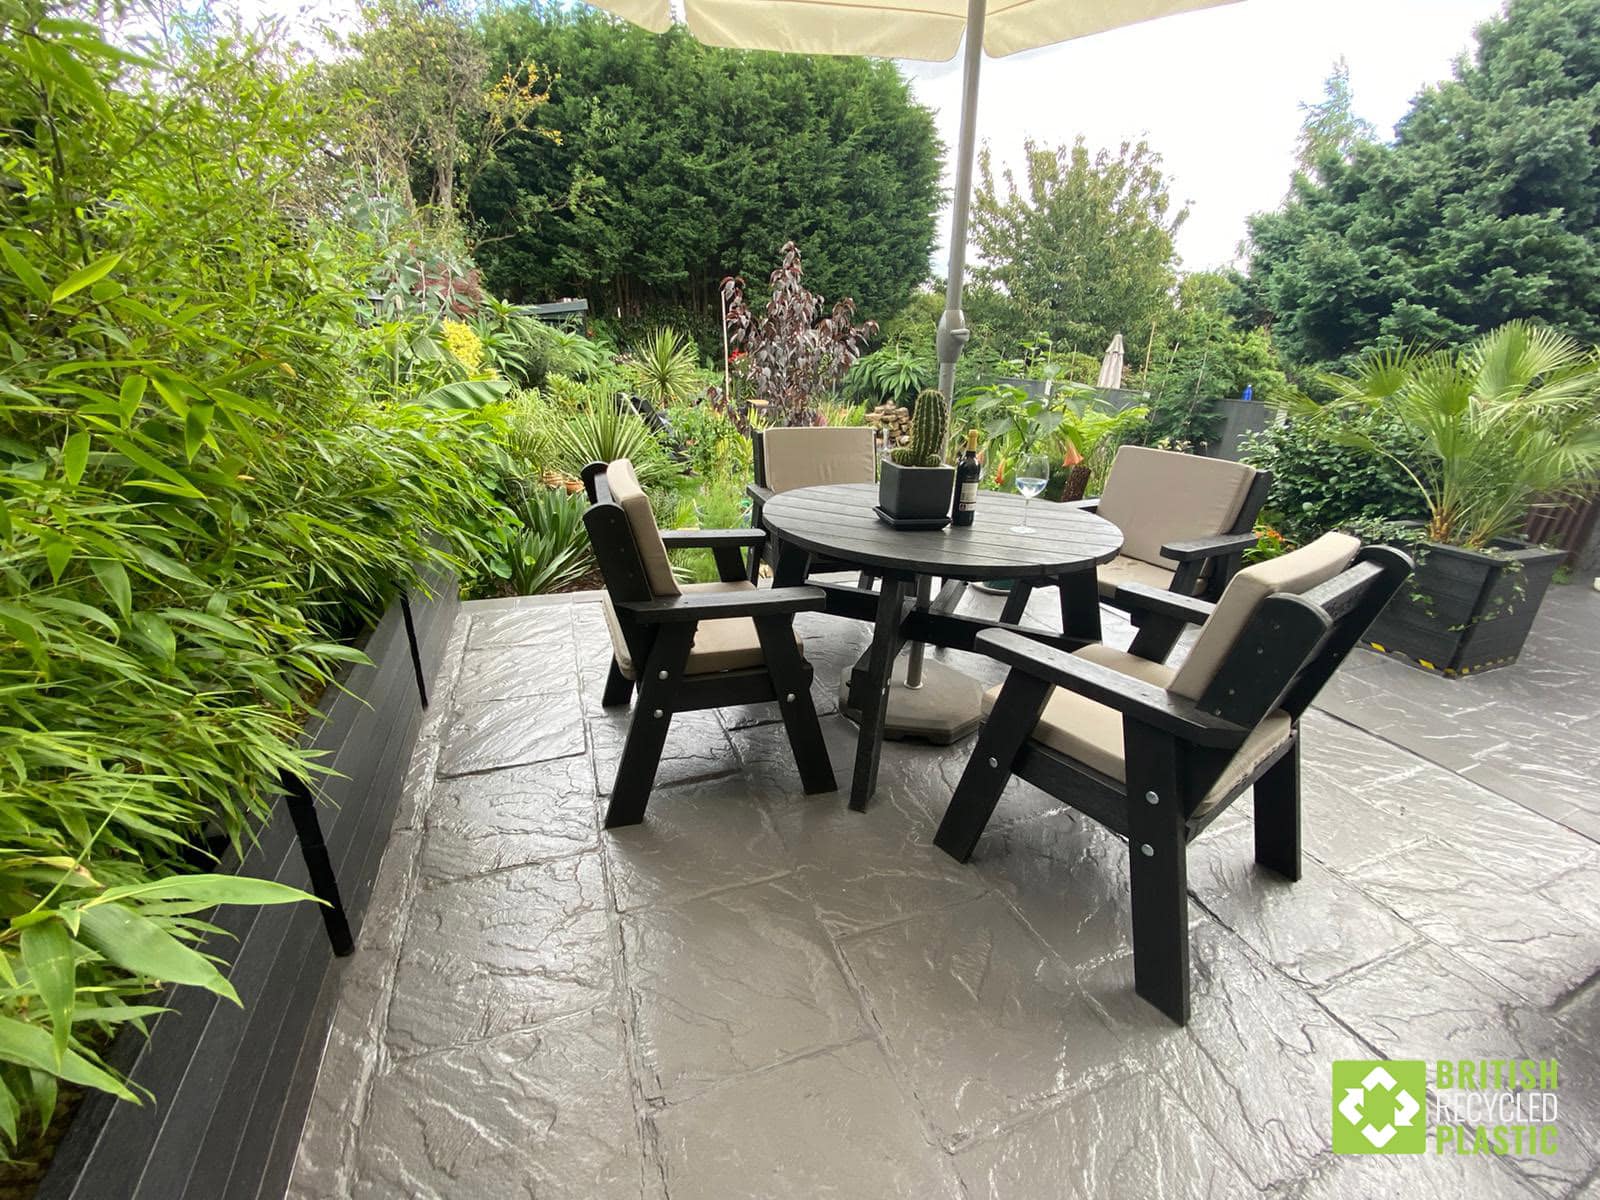 The Roundhay recycled plastic garden dining set